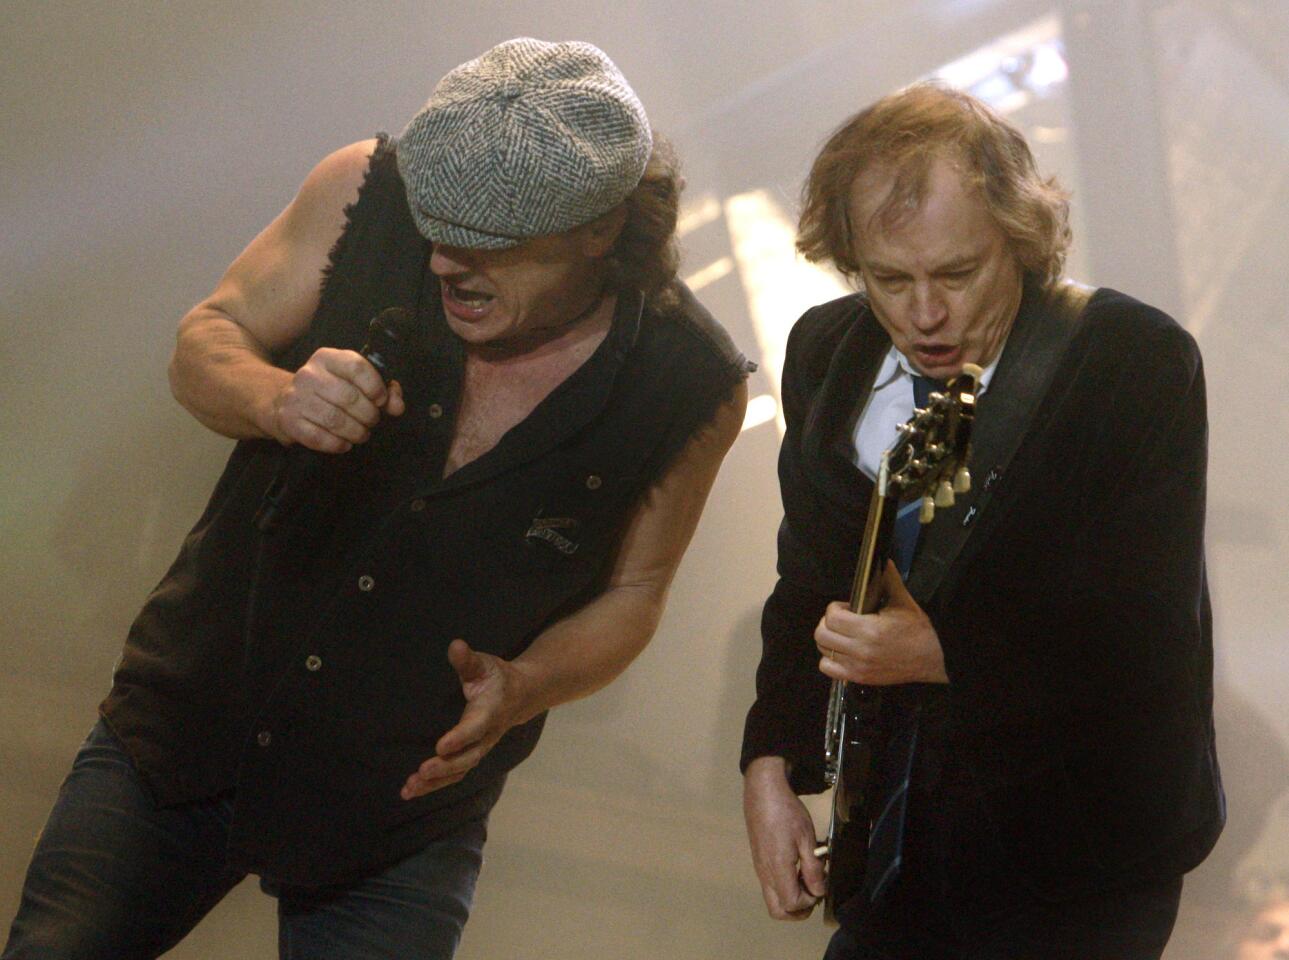 Brian Johnson, left, and Angus Young of the rock band AC/DC. The hard rock legends will headline the first nights of the twin Coachella weekends.